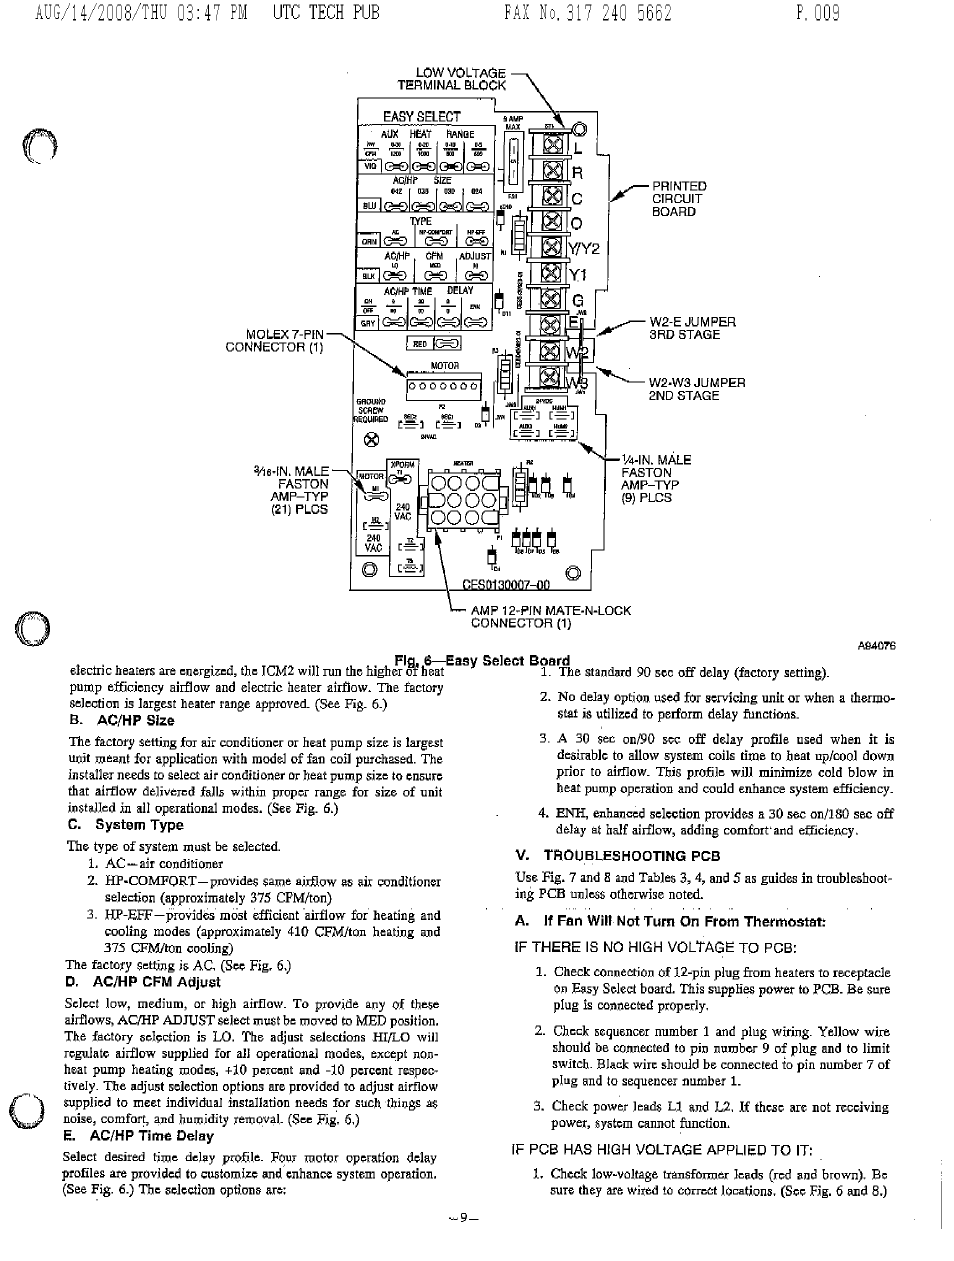 Fig, 6—easy, Select board, V. troubleshooting pcb | Bryant FA4A User ...